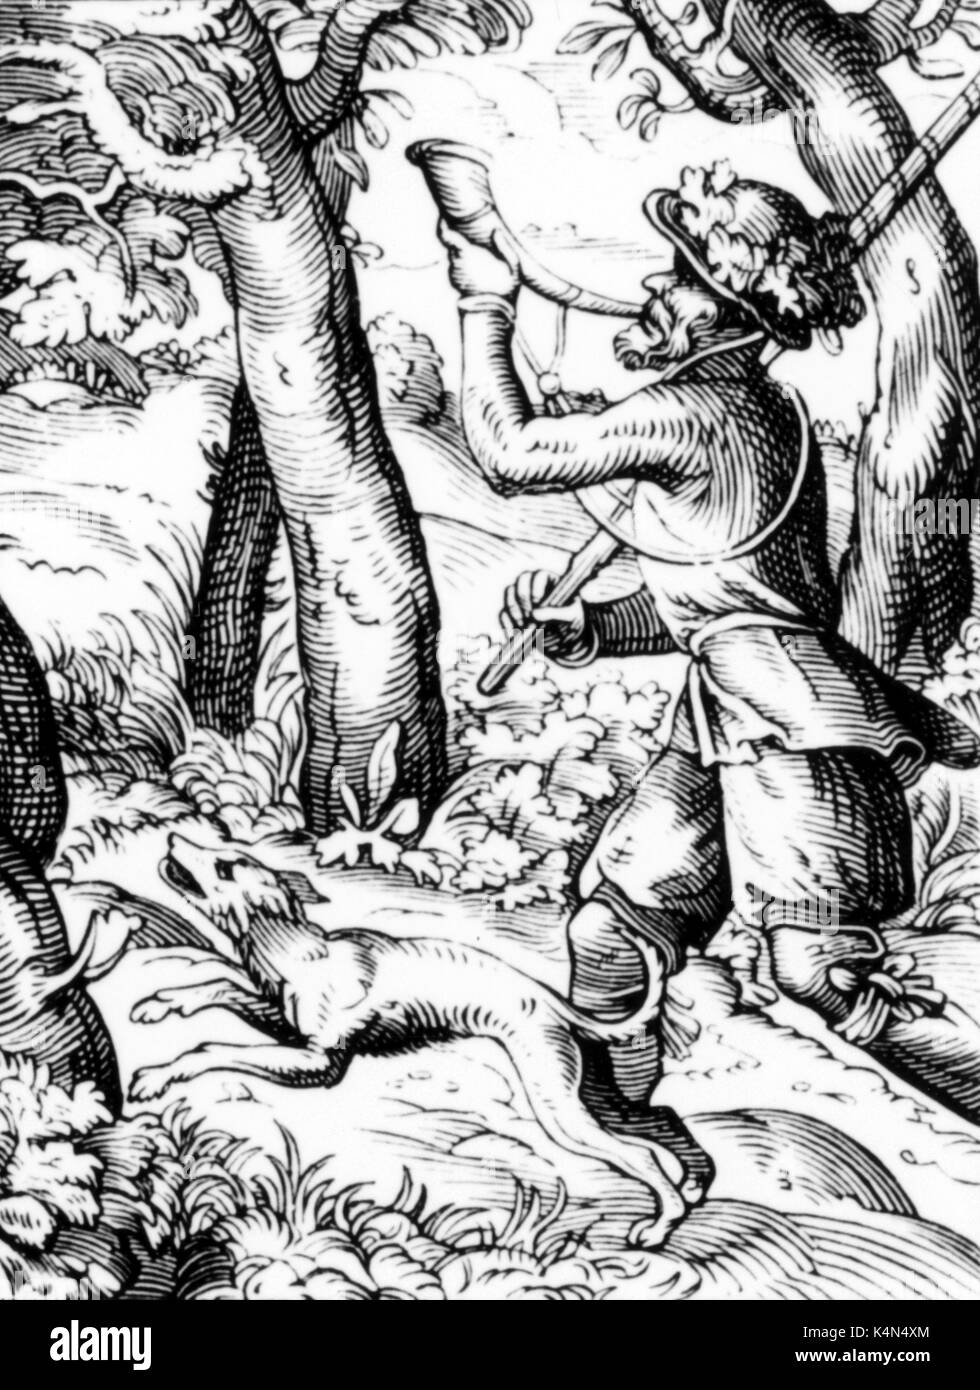 Hunting horn - Man blowing hunting horn, with dog. Woodcut, c. 1570 Stock Photo